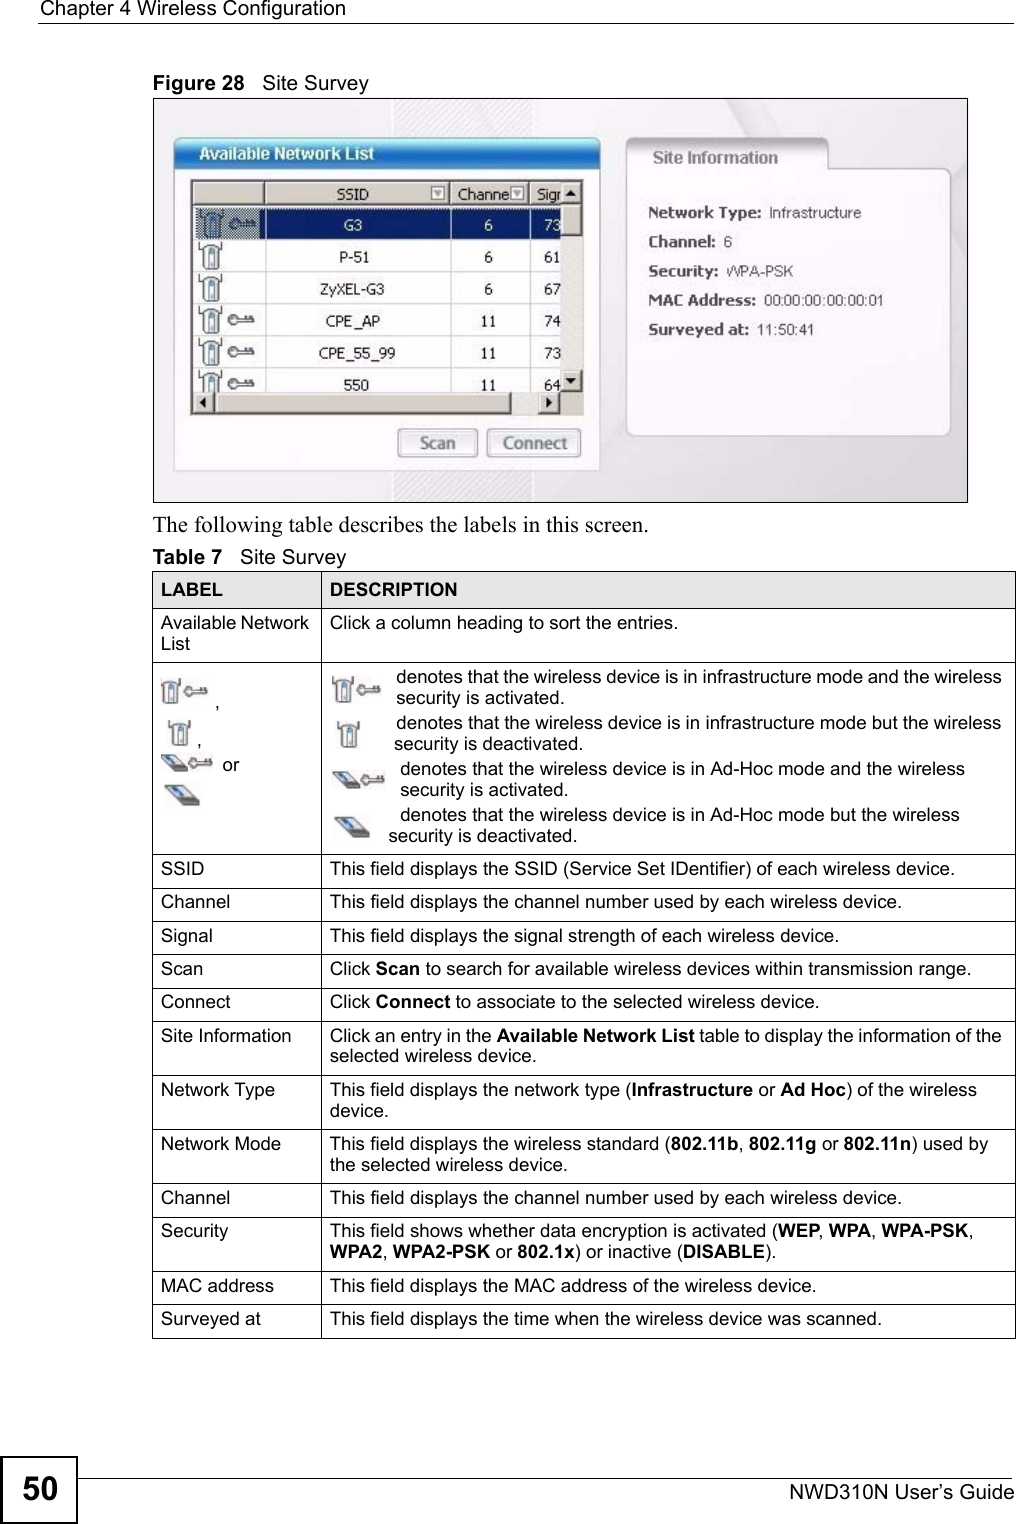 Chapter 4 Wireless ConfigurationNWD310N User’s Guide50Figure 28   Site Survey The following table describes the labels in this screen. Table 7   Site Survey LABEL DESCRIPTIONAvailable Network ListClick a column heading to sort the entries.,, ordenotes that the wireless device is in infrastructure mode and the wireless security is activated.denotes that the wireless device is in infrastructure mode but the wireless security is deactivated.denotes that the wireless device is in Ad-Hoc mode and the wireless security is activated.denotes that the wireless device is in Ad-Hoc mode but the wireless security is deactivated.SSID This field displays the SSID (Service Set IDentifier) of each wireless device.Channel This field displays the channel number used by each wireless device.Signal This field displays the signal strength of each wireless device.Scan Click Scan to search for available wireless devices within transmission range.Connect Click Connect to associate to the selected wireless device.Site Information Click an entry in the Available Network List table to display the information of the selected wireless device.Network Type  This field displays the network type (Infrastructure or Ad Hoc) of the wireless device.Network Mode This field displays the wireless standard (802.11b, 802.11g or 802.11n) used by the selected wireless device.Channel This field displays the channel number used by each wireless device.Security This field shows whether data encryption is activated (WEP, WPA, WPA-PSK, WPA2, WPA2-PSK or 802.1x) or inactive (DISABLE).MAC address  This field displays the MAC address of the wireless device.Surveyed at  This field displays the time when the wireless device was scanned.